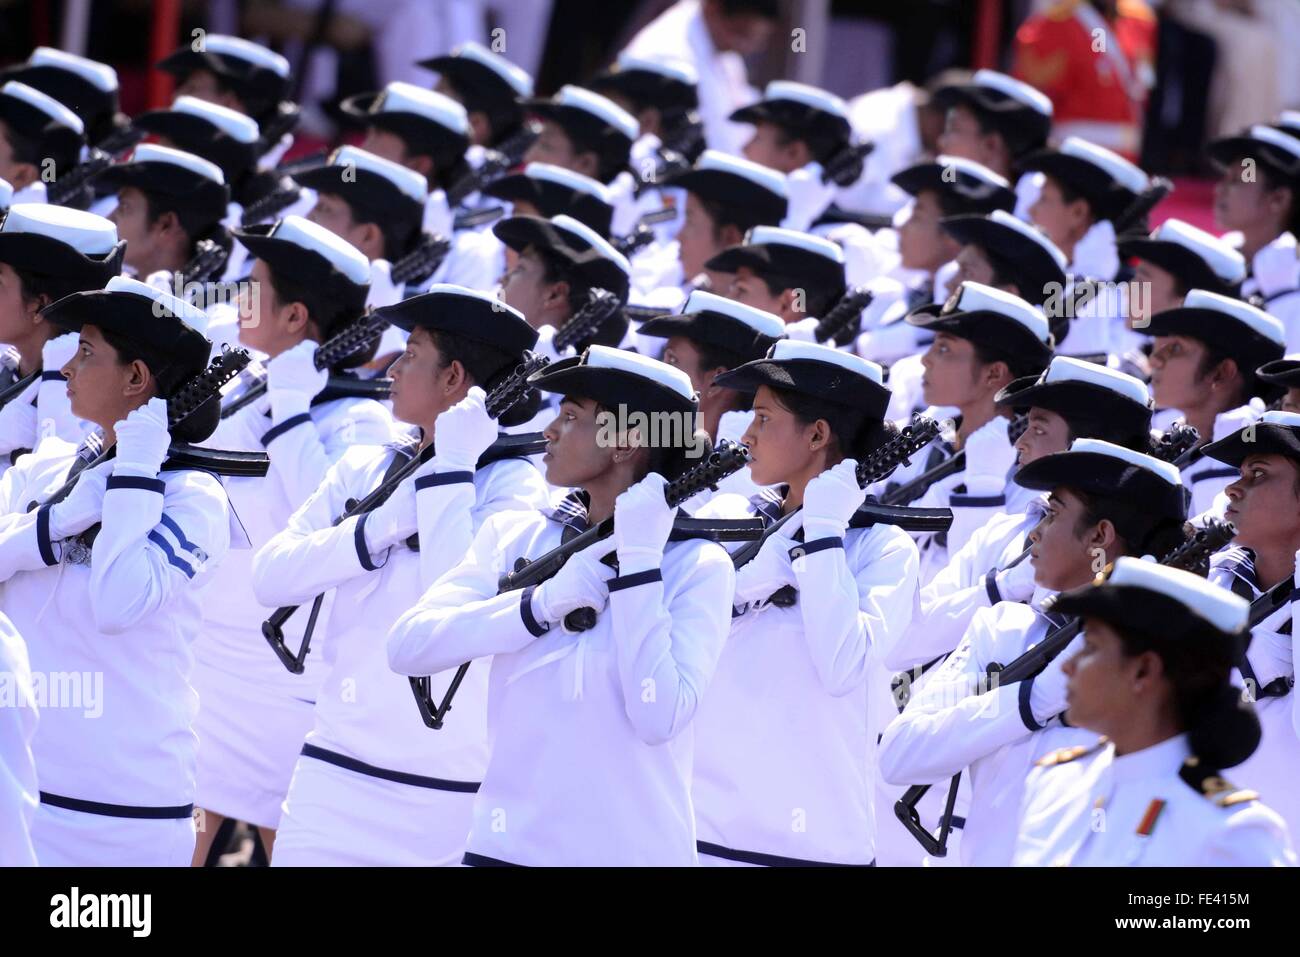 Colombo, Sri Lanka. 4th Feb, 2016. Sri Lankan Naval soldiers march during the 68th Independence Day celebration parade in Colombo, capital of Sri Lanka, Feb. 4, 2016. Sri Lanka on Thursday celebrated the 68th anniversary of gaining independence from the British colonial rule in 1948. This year the theme is 'Ekama Deyak, Maha Balayak' (One Nation, Great Power). Credit:  Gayan Sameera/Xinhua/Alamy Live News Stock Photo